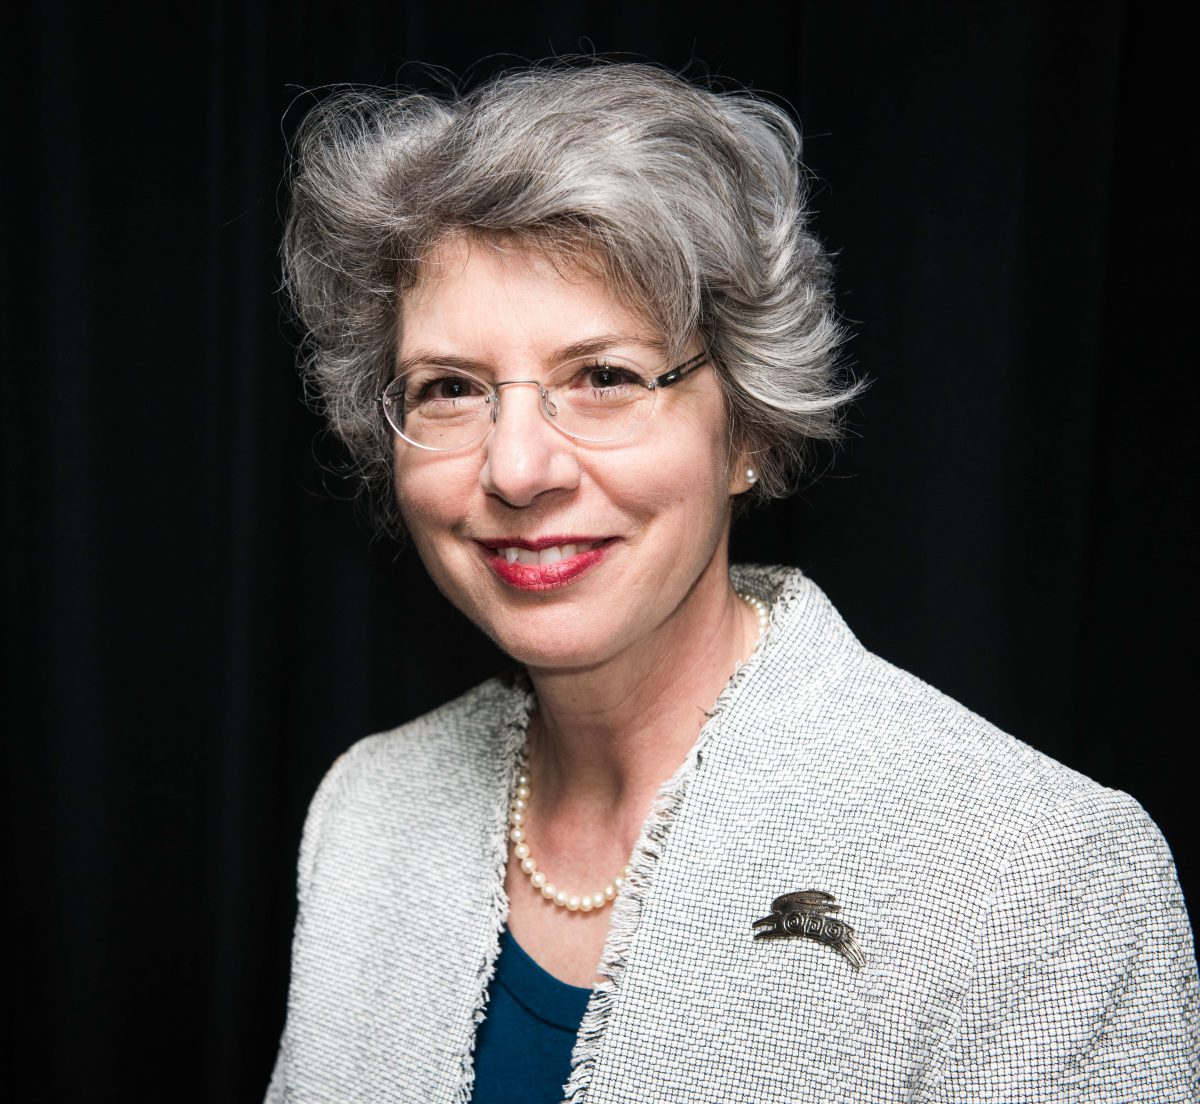 Portrait of a woman with grey hair smiling, wearing glasses and a grey blazer.